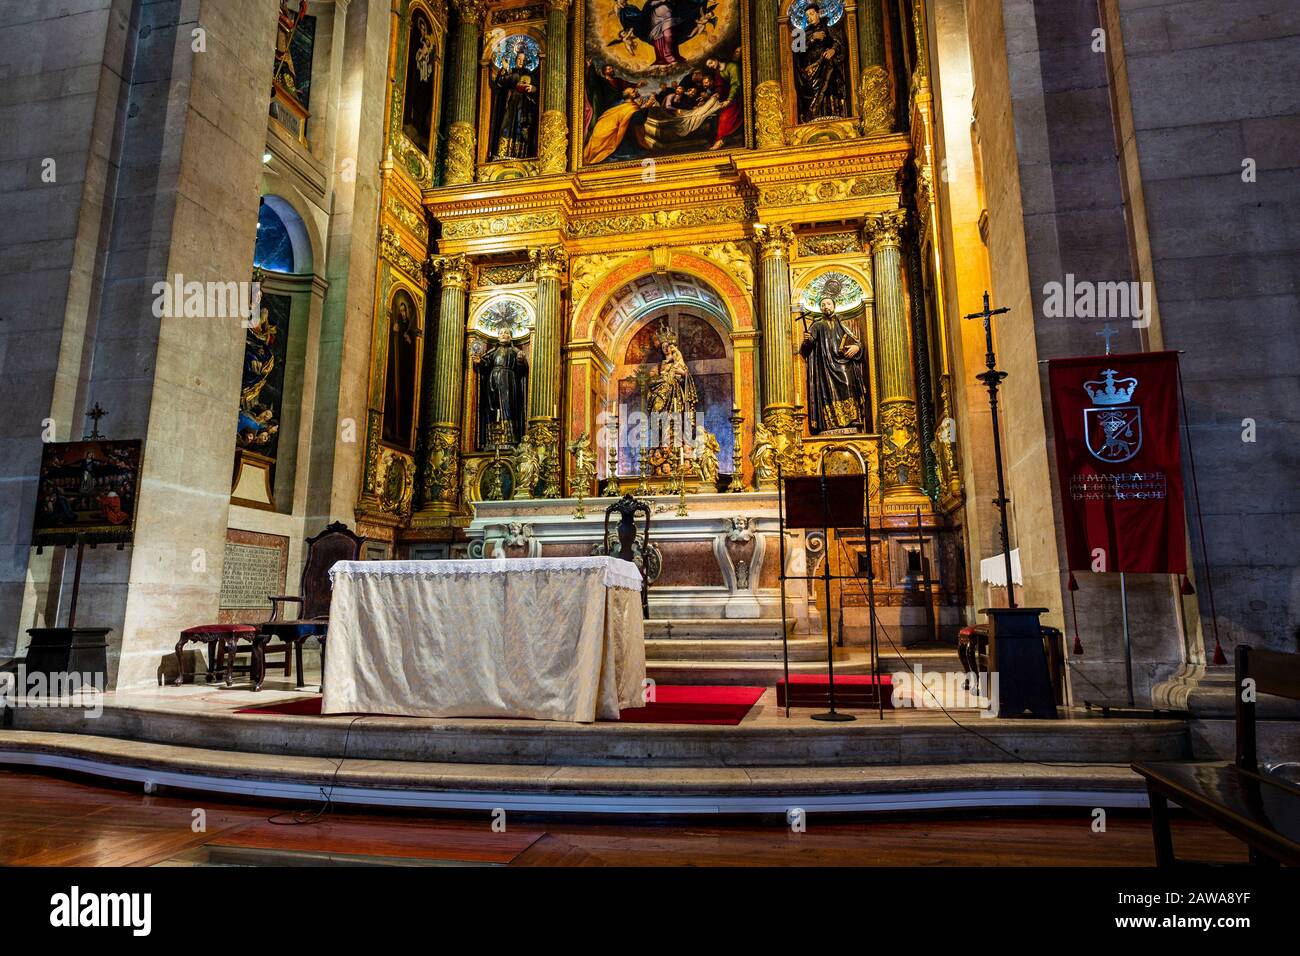 Detail of the chancel with a gilded altar piece and representation of the Jesuits greatest saints, in Bairro Alto, Lisbon, Portugal Stock Photo